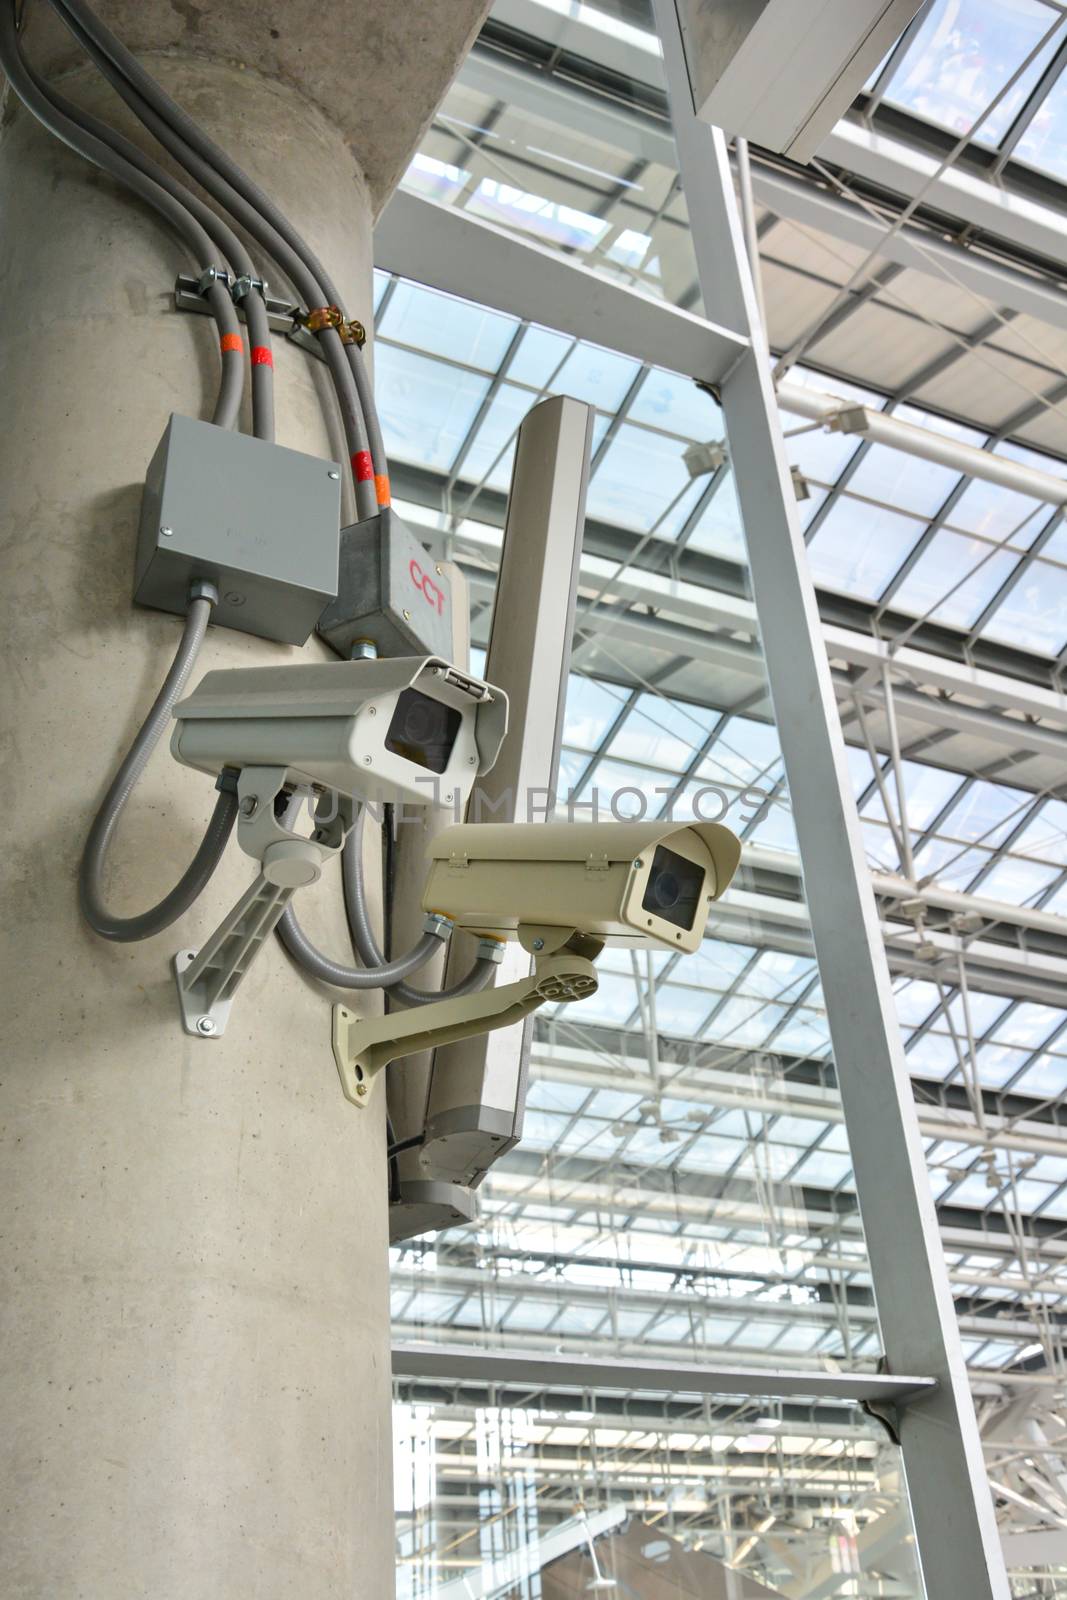 CCTV camera or surveillance operating with electric door in back